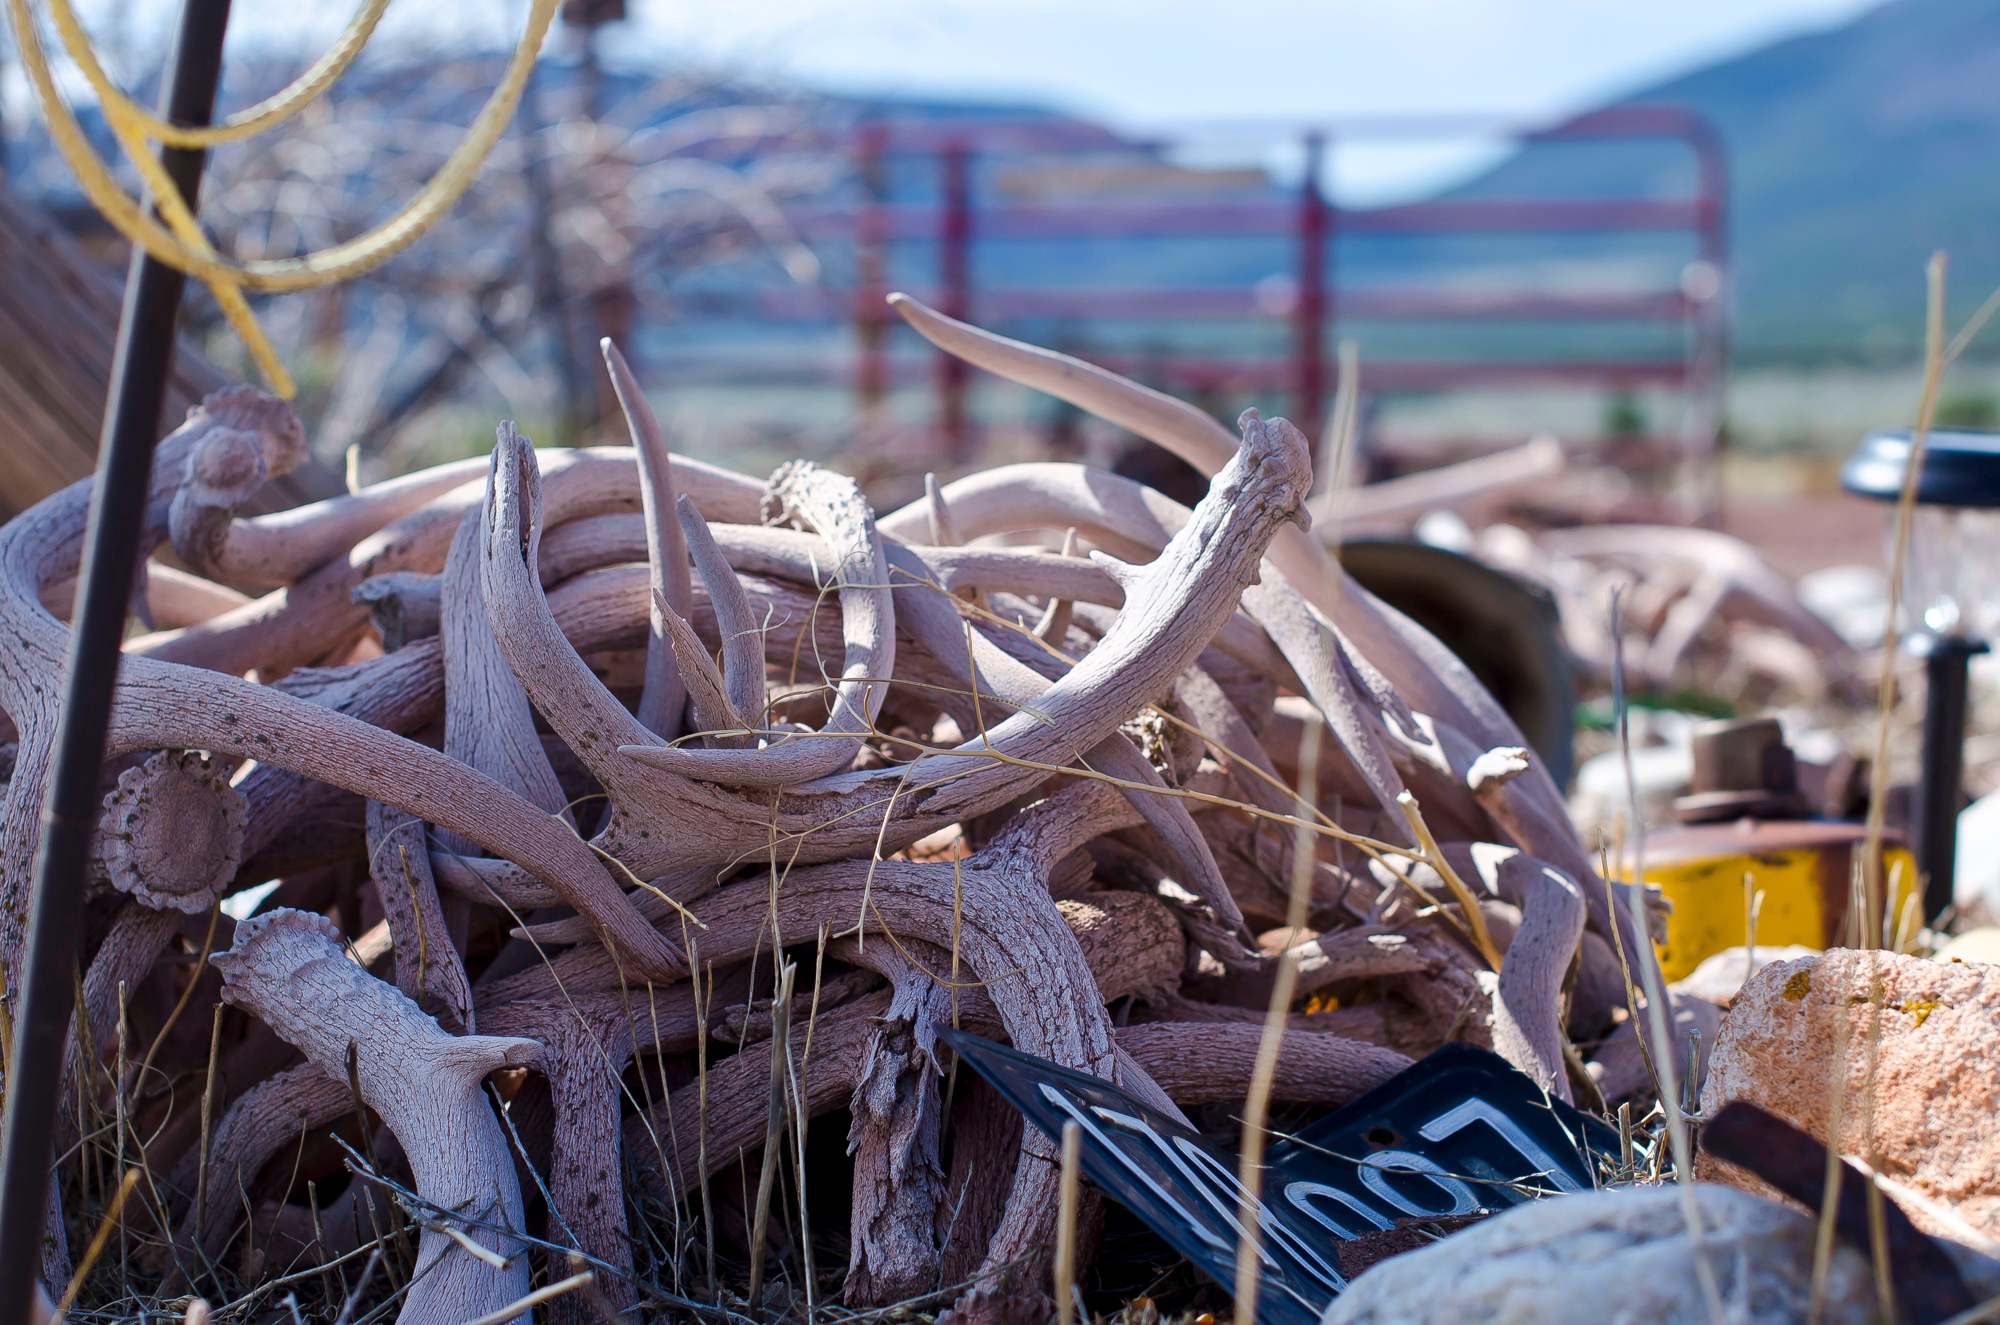 A pile of old shed antlers in Utah.